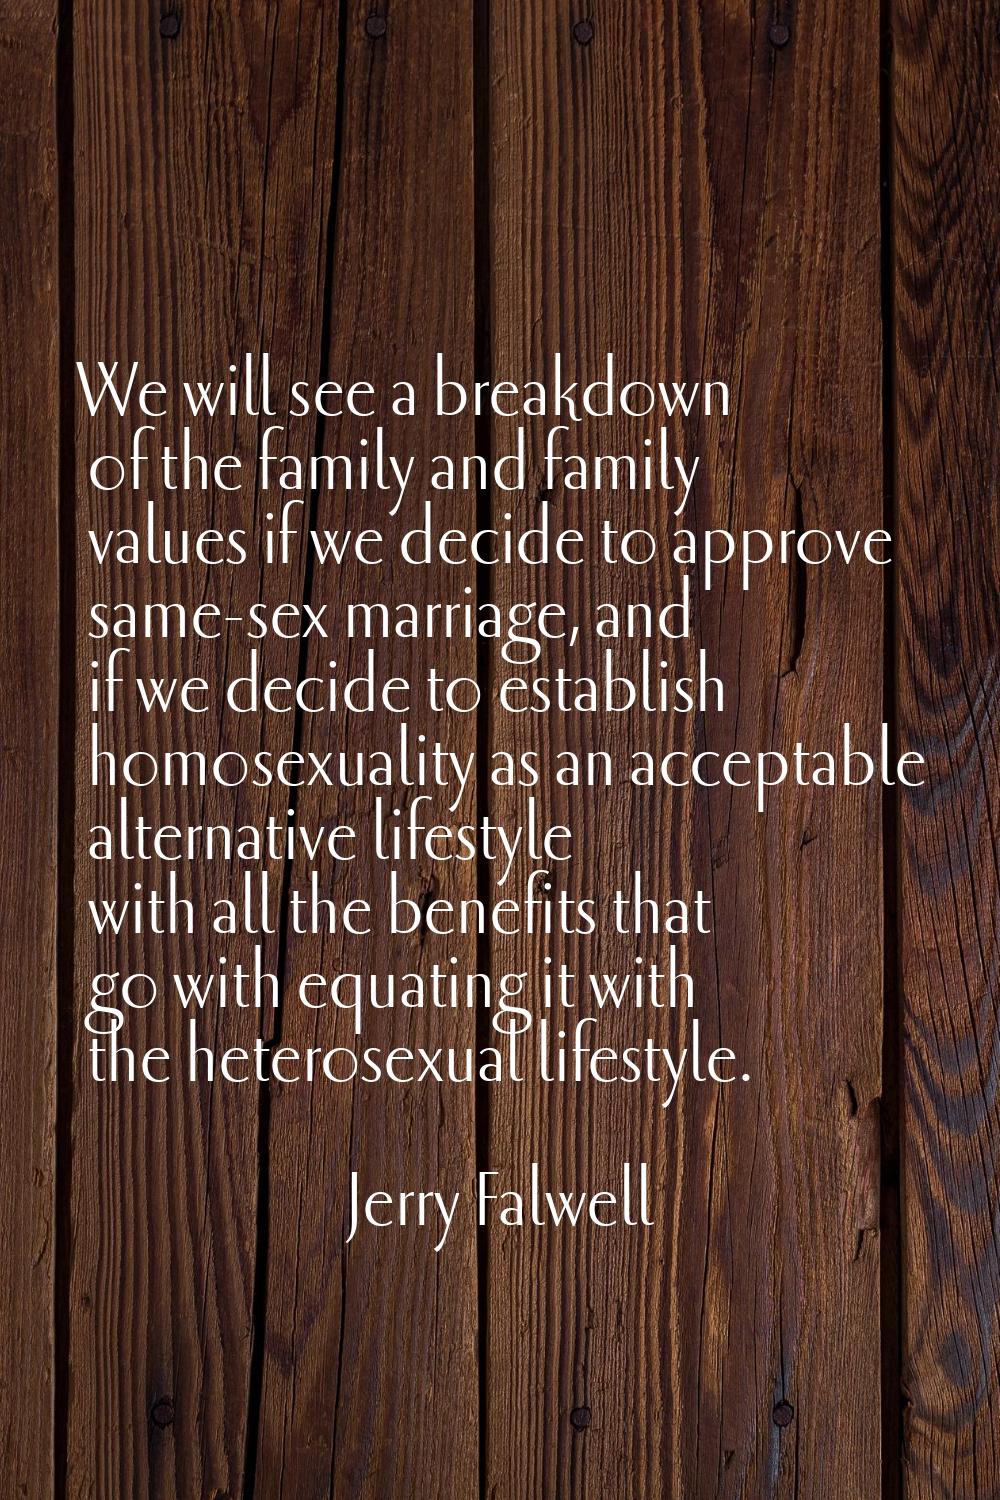 We will see a breakdown of the family and family values if we decide to approve same-sex marriage, 